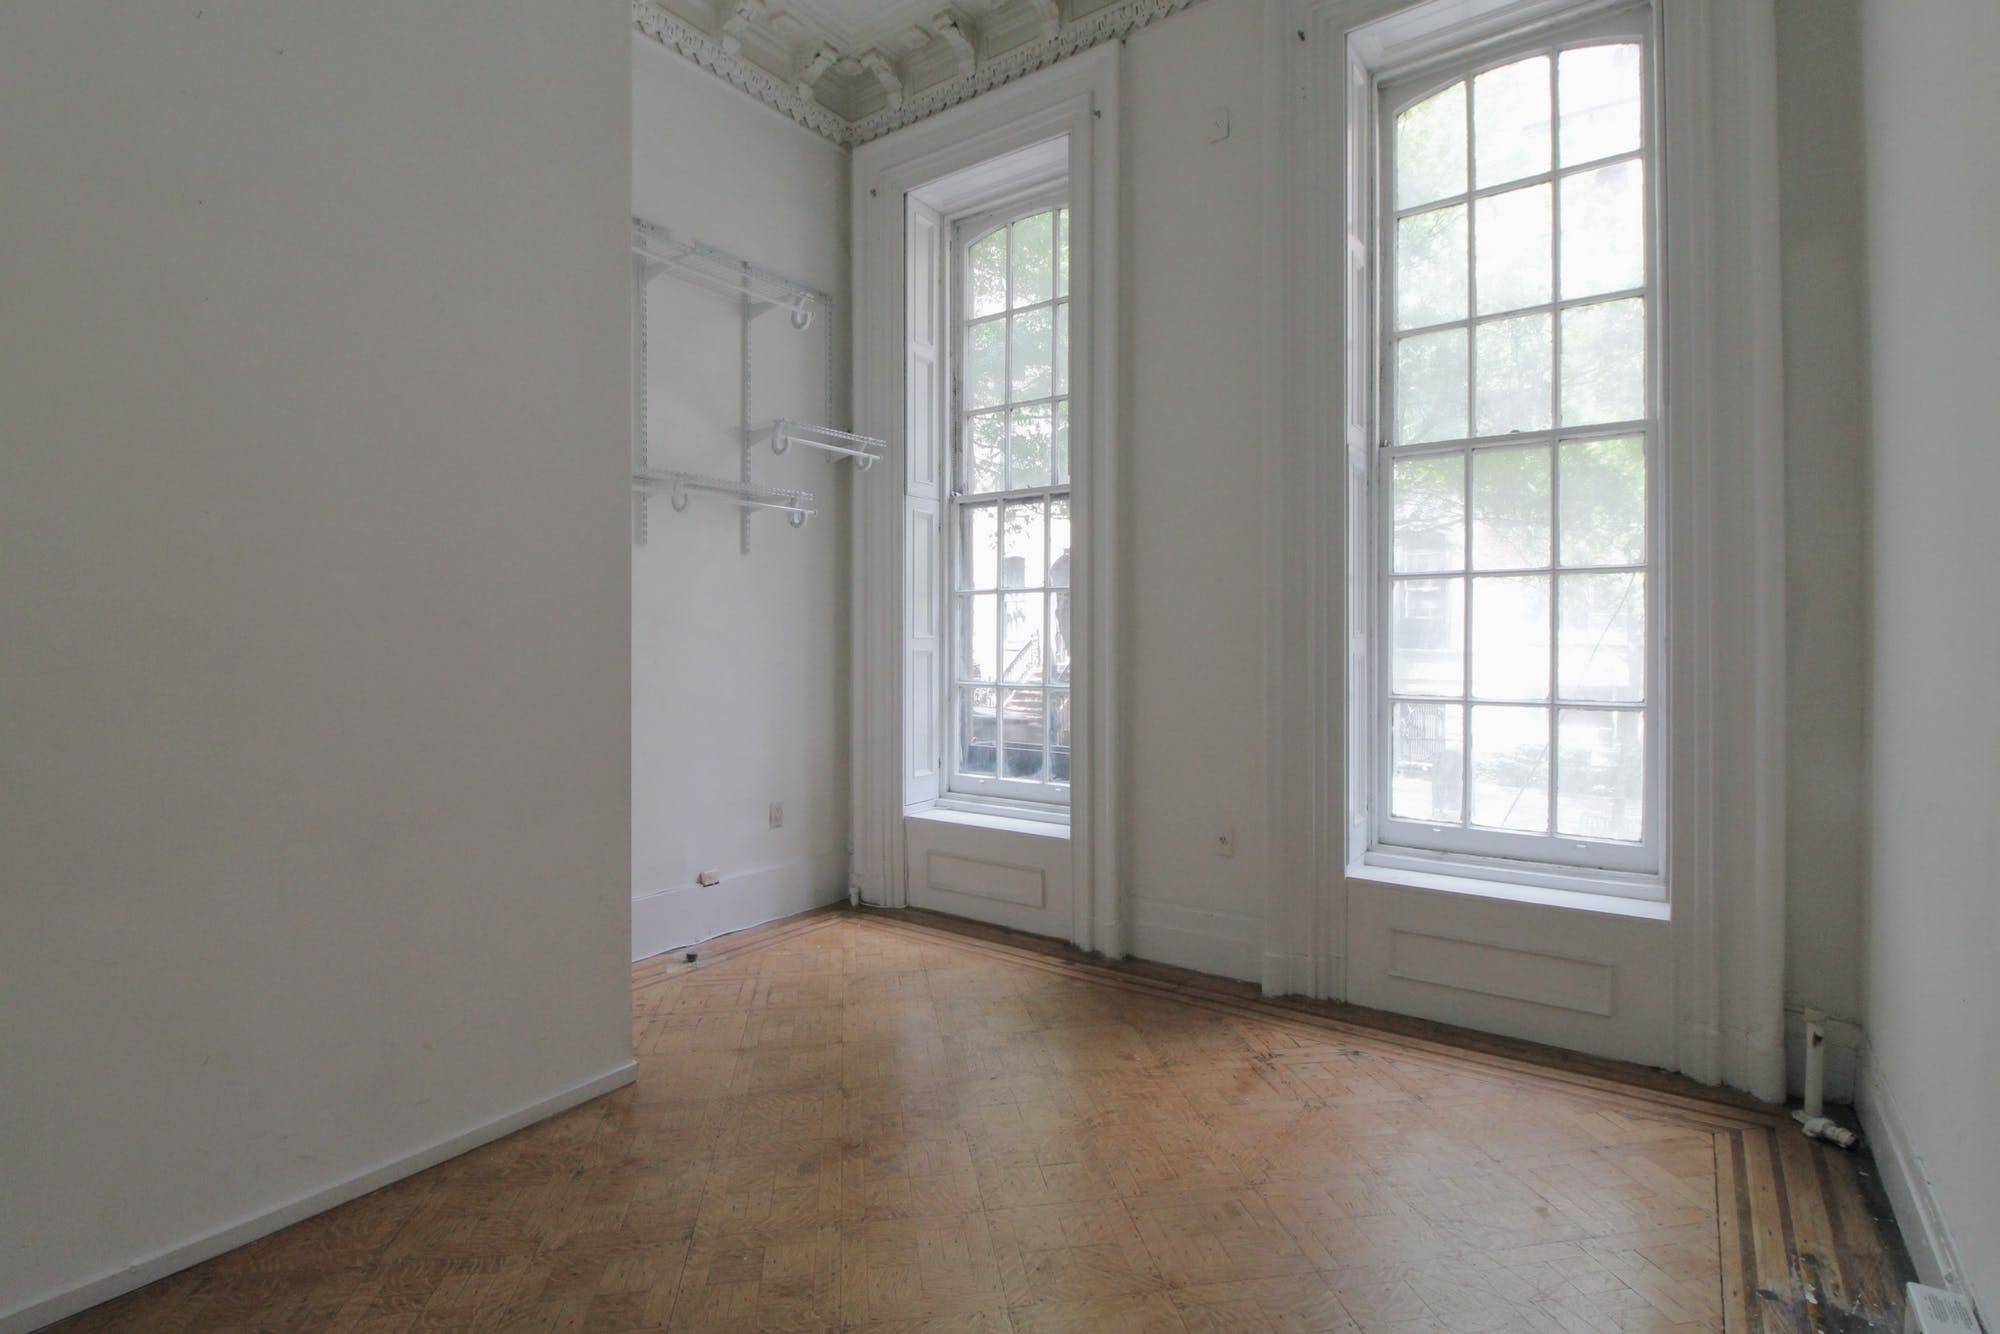 Enjoy close to 1, 000 SF of living space on the second floor of a brownstone in Murray Hill.